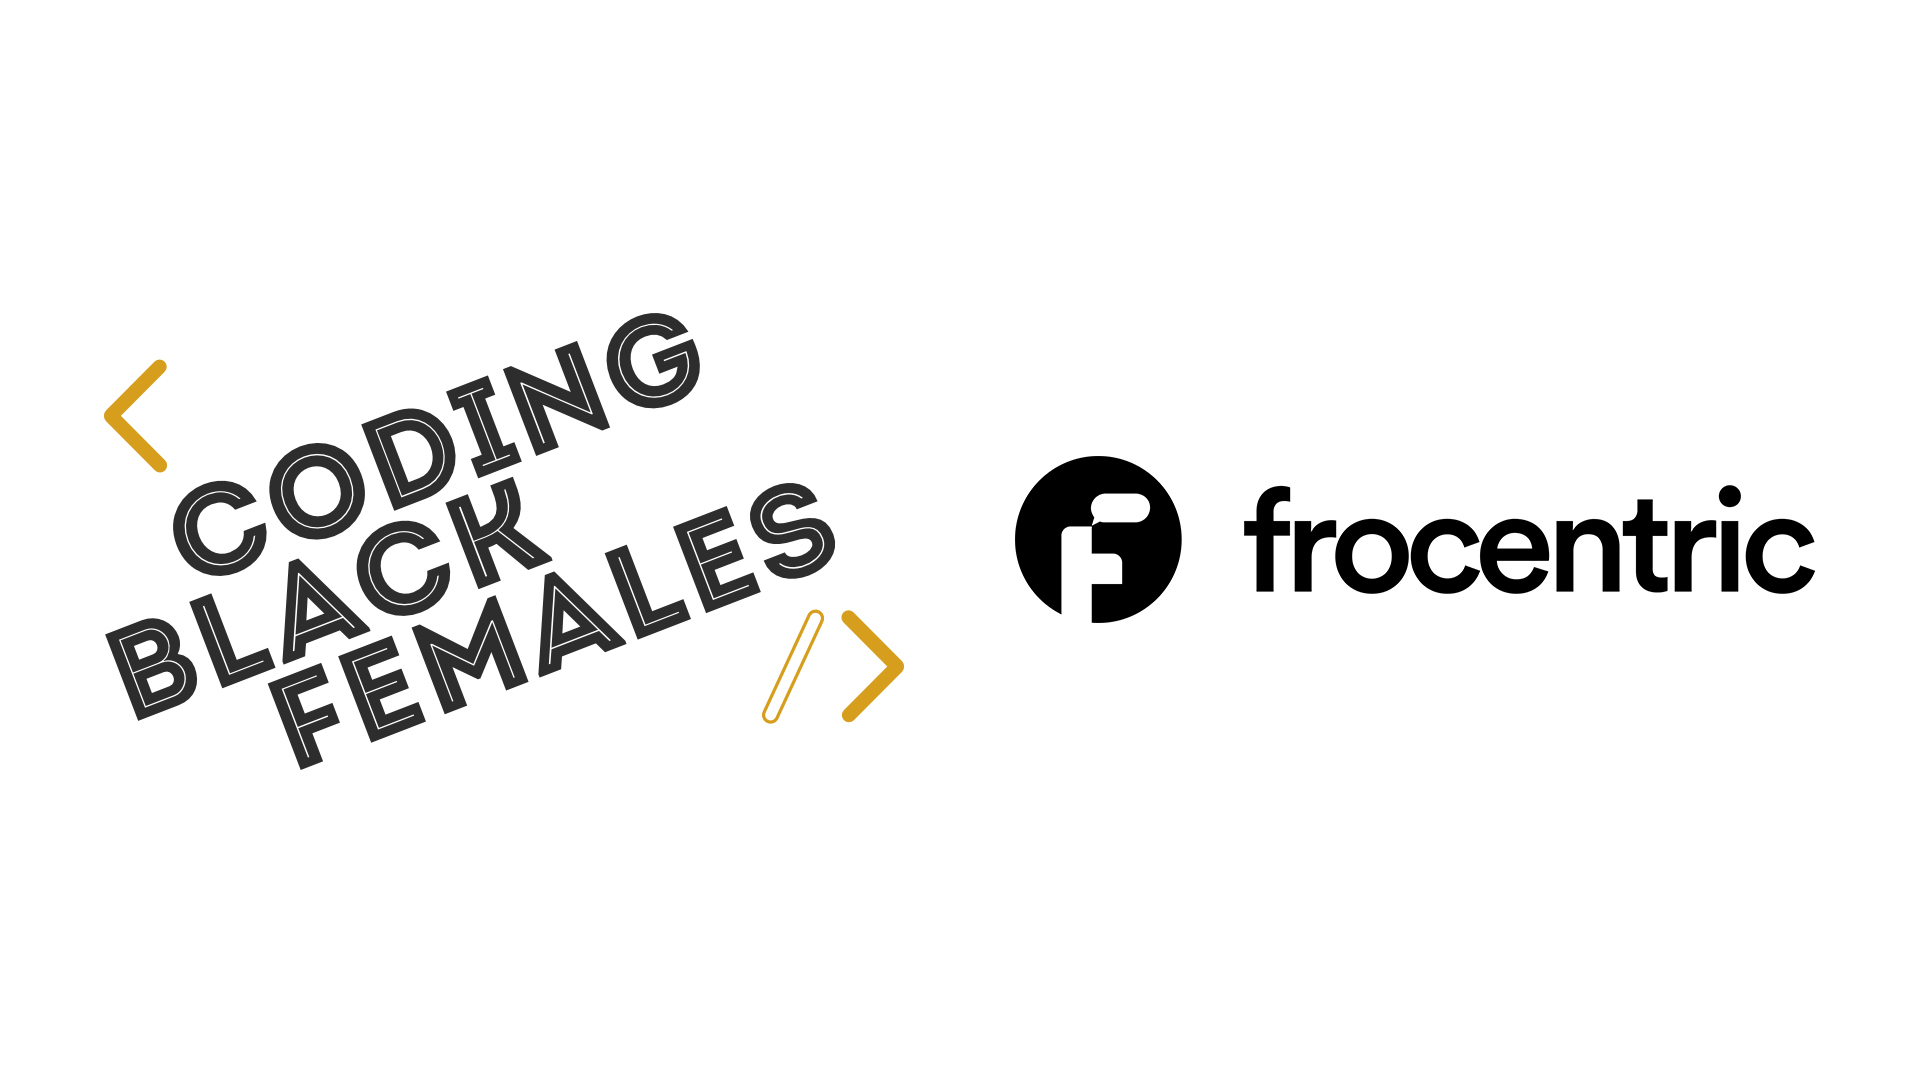 Coding Black Females & Frocentric logos on a white backdrop